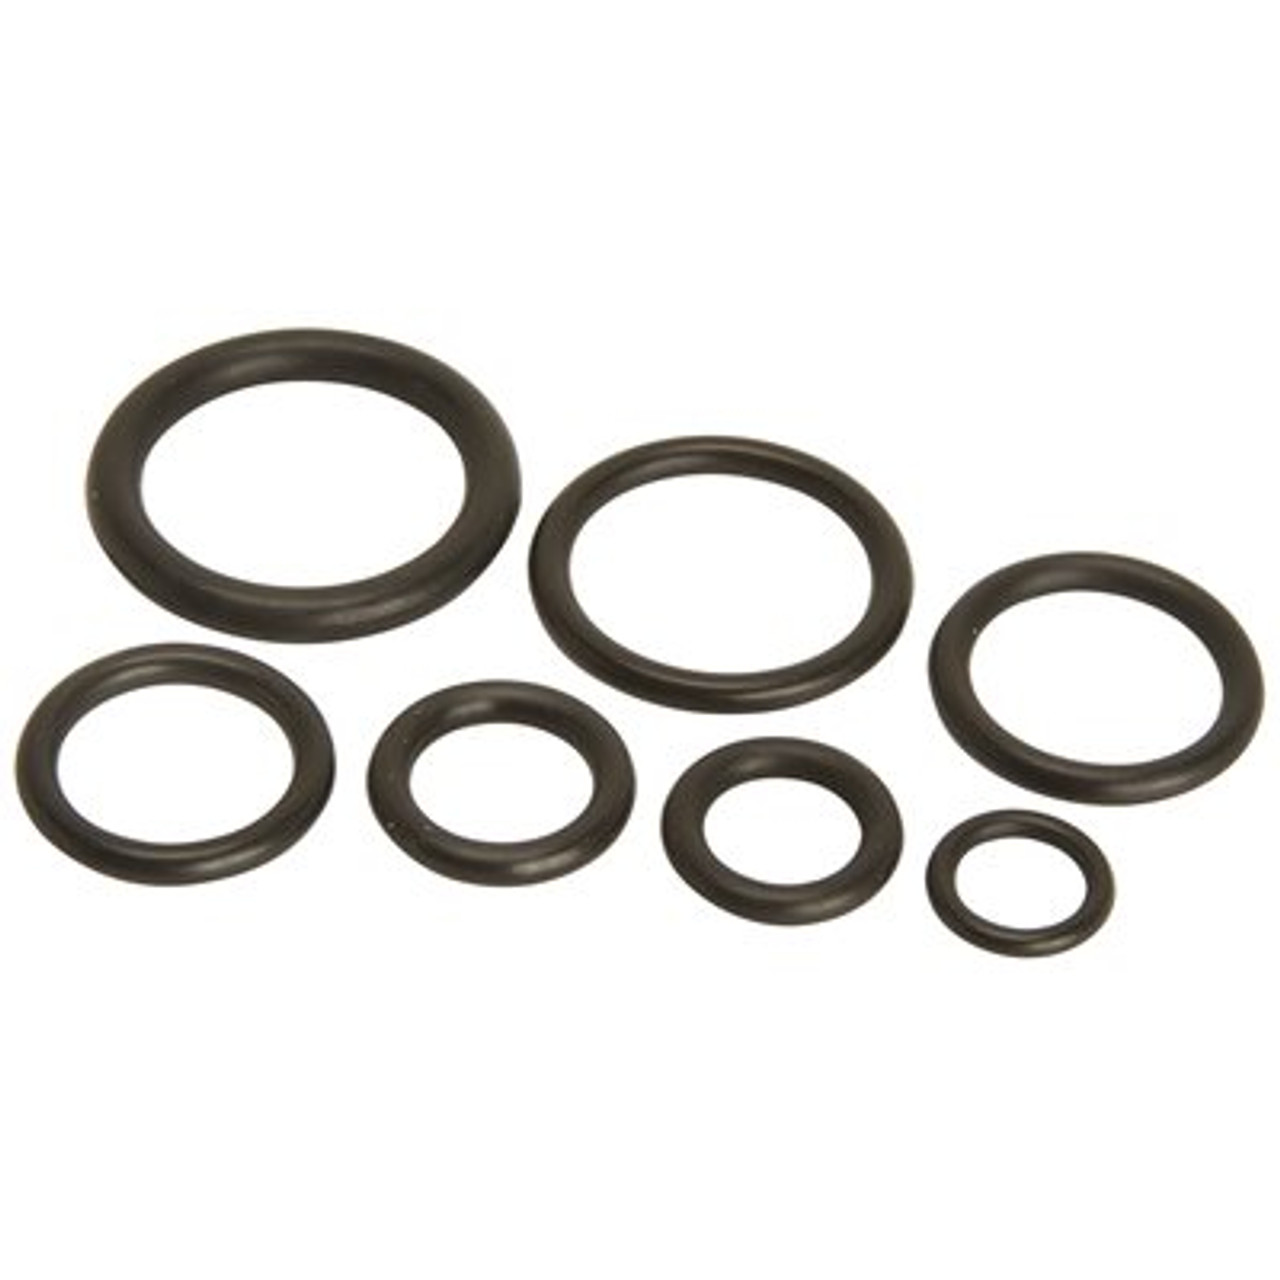 ProPlus Assorted O-Rings, 7-Pieces